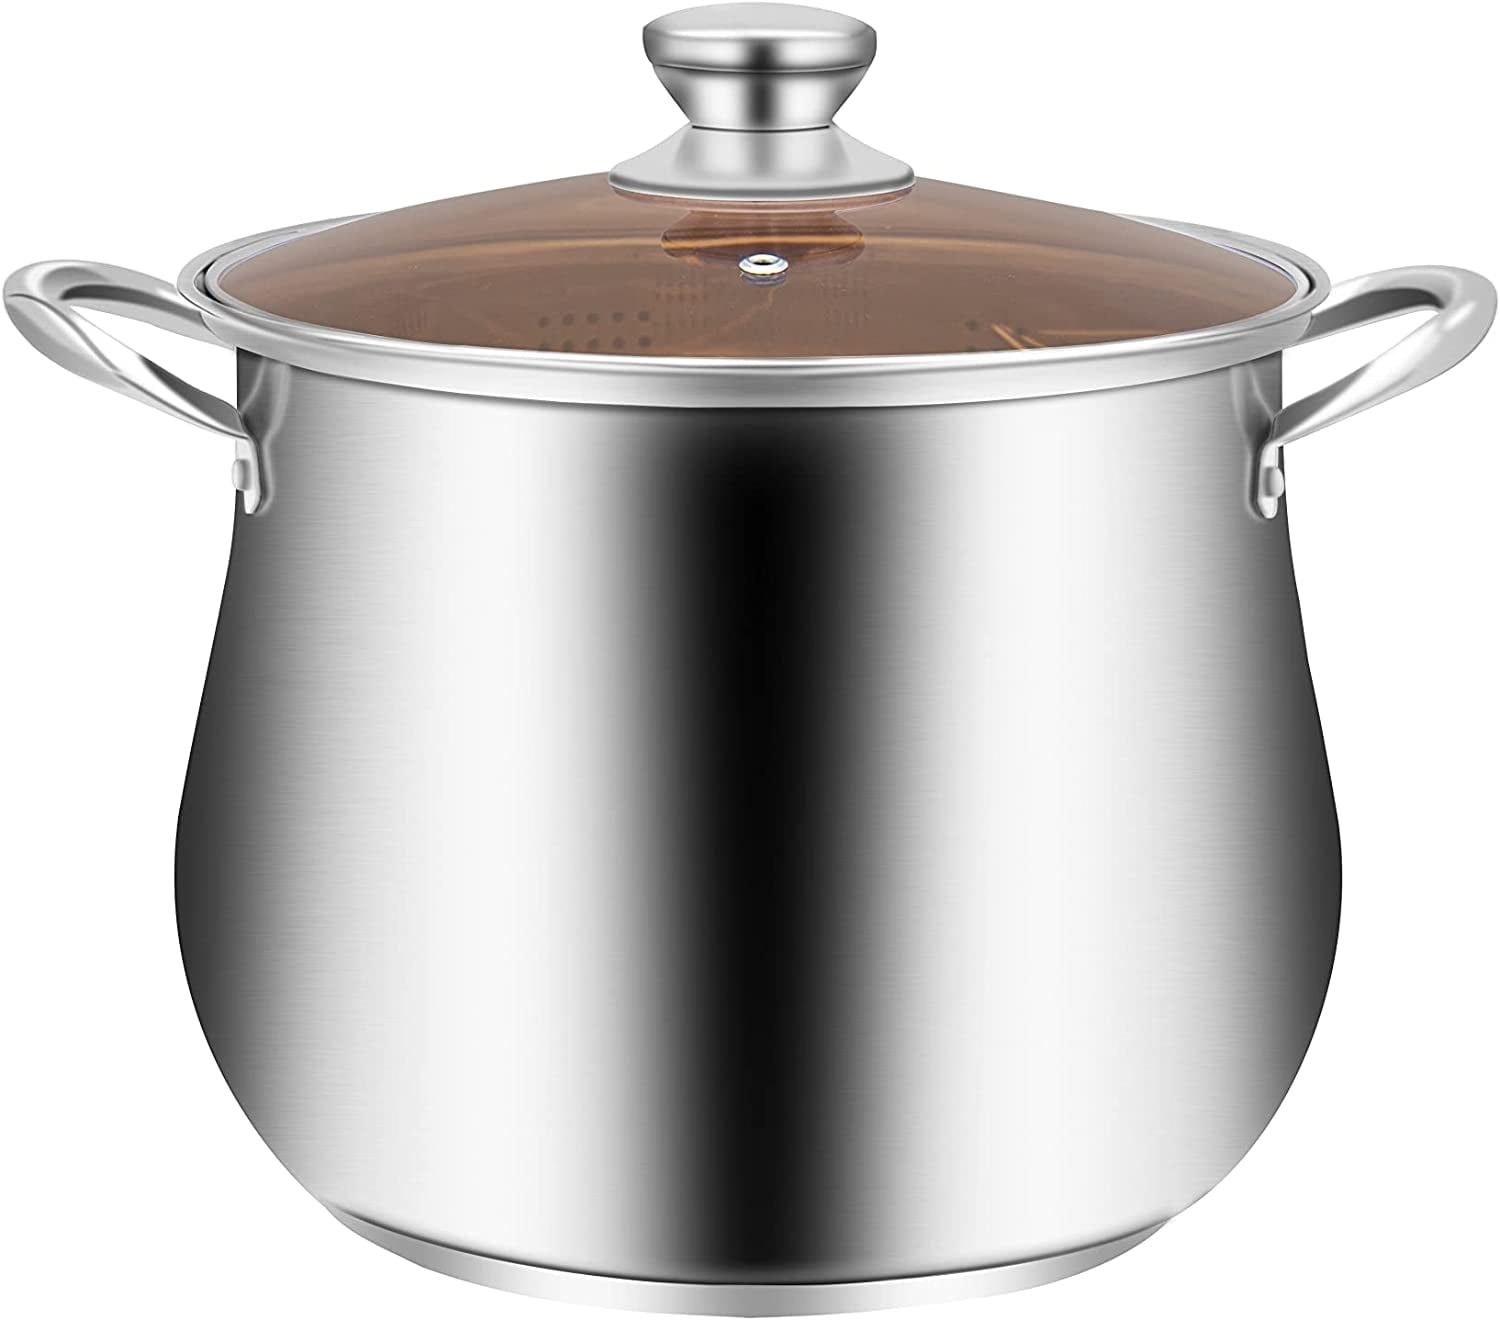 Stockpot With Lid Stainless Steel Soup Pot Cooking Pots Lids Non